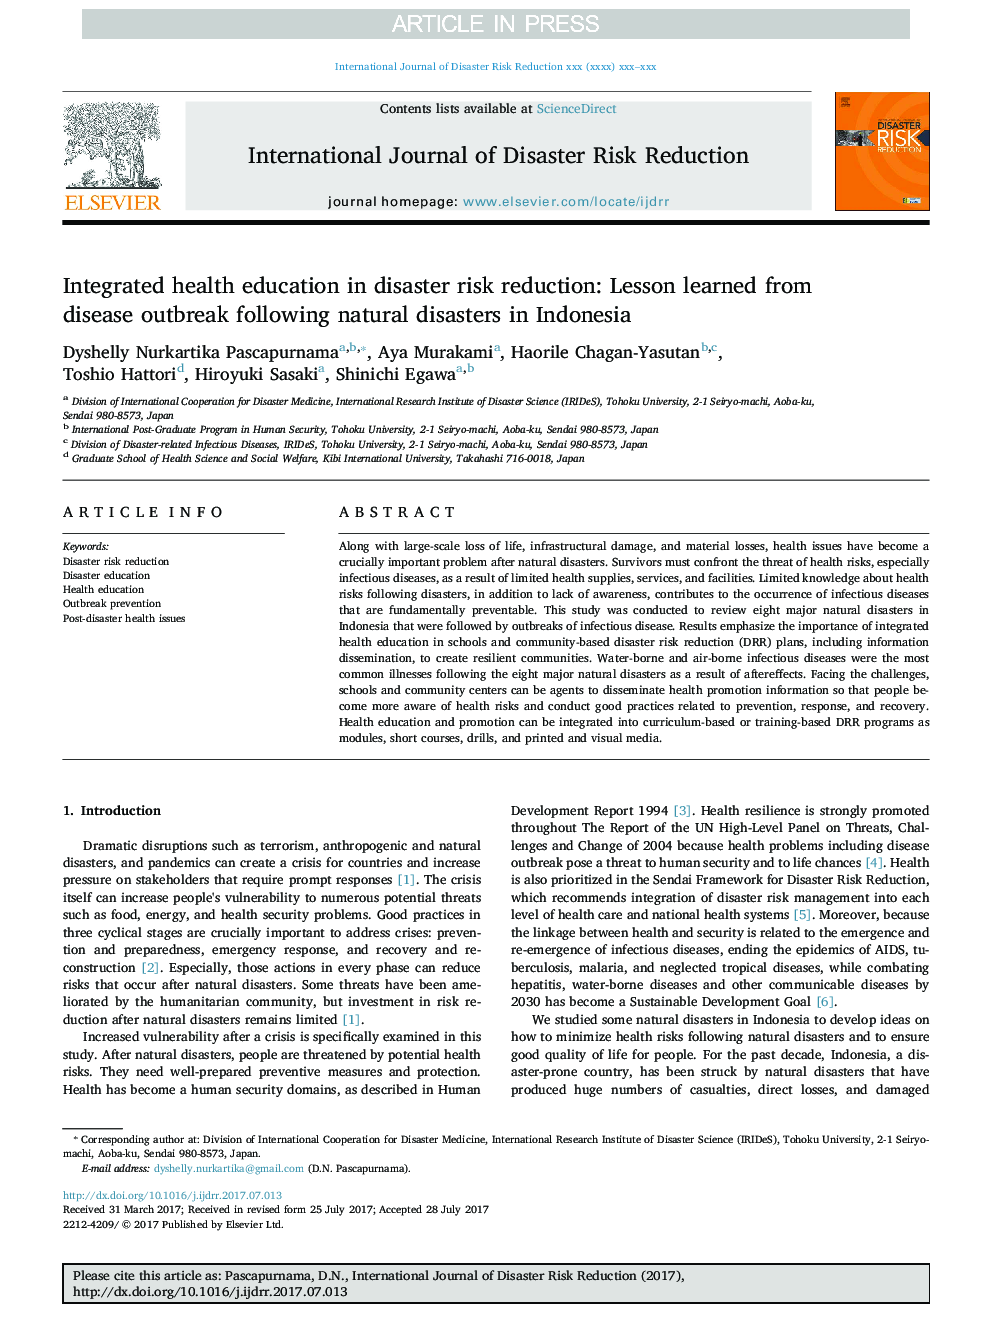 Integrated health education in disaster risk reduction: Lesson learned from disease outbreak following natural disasters in Indonesia